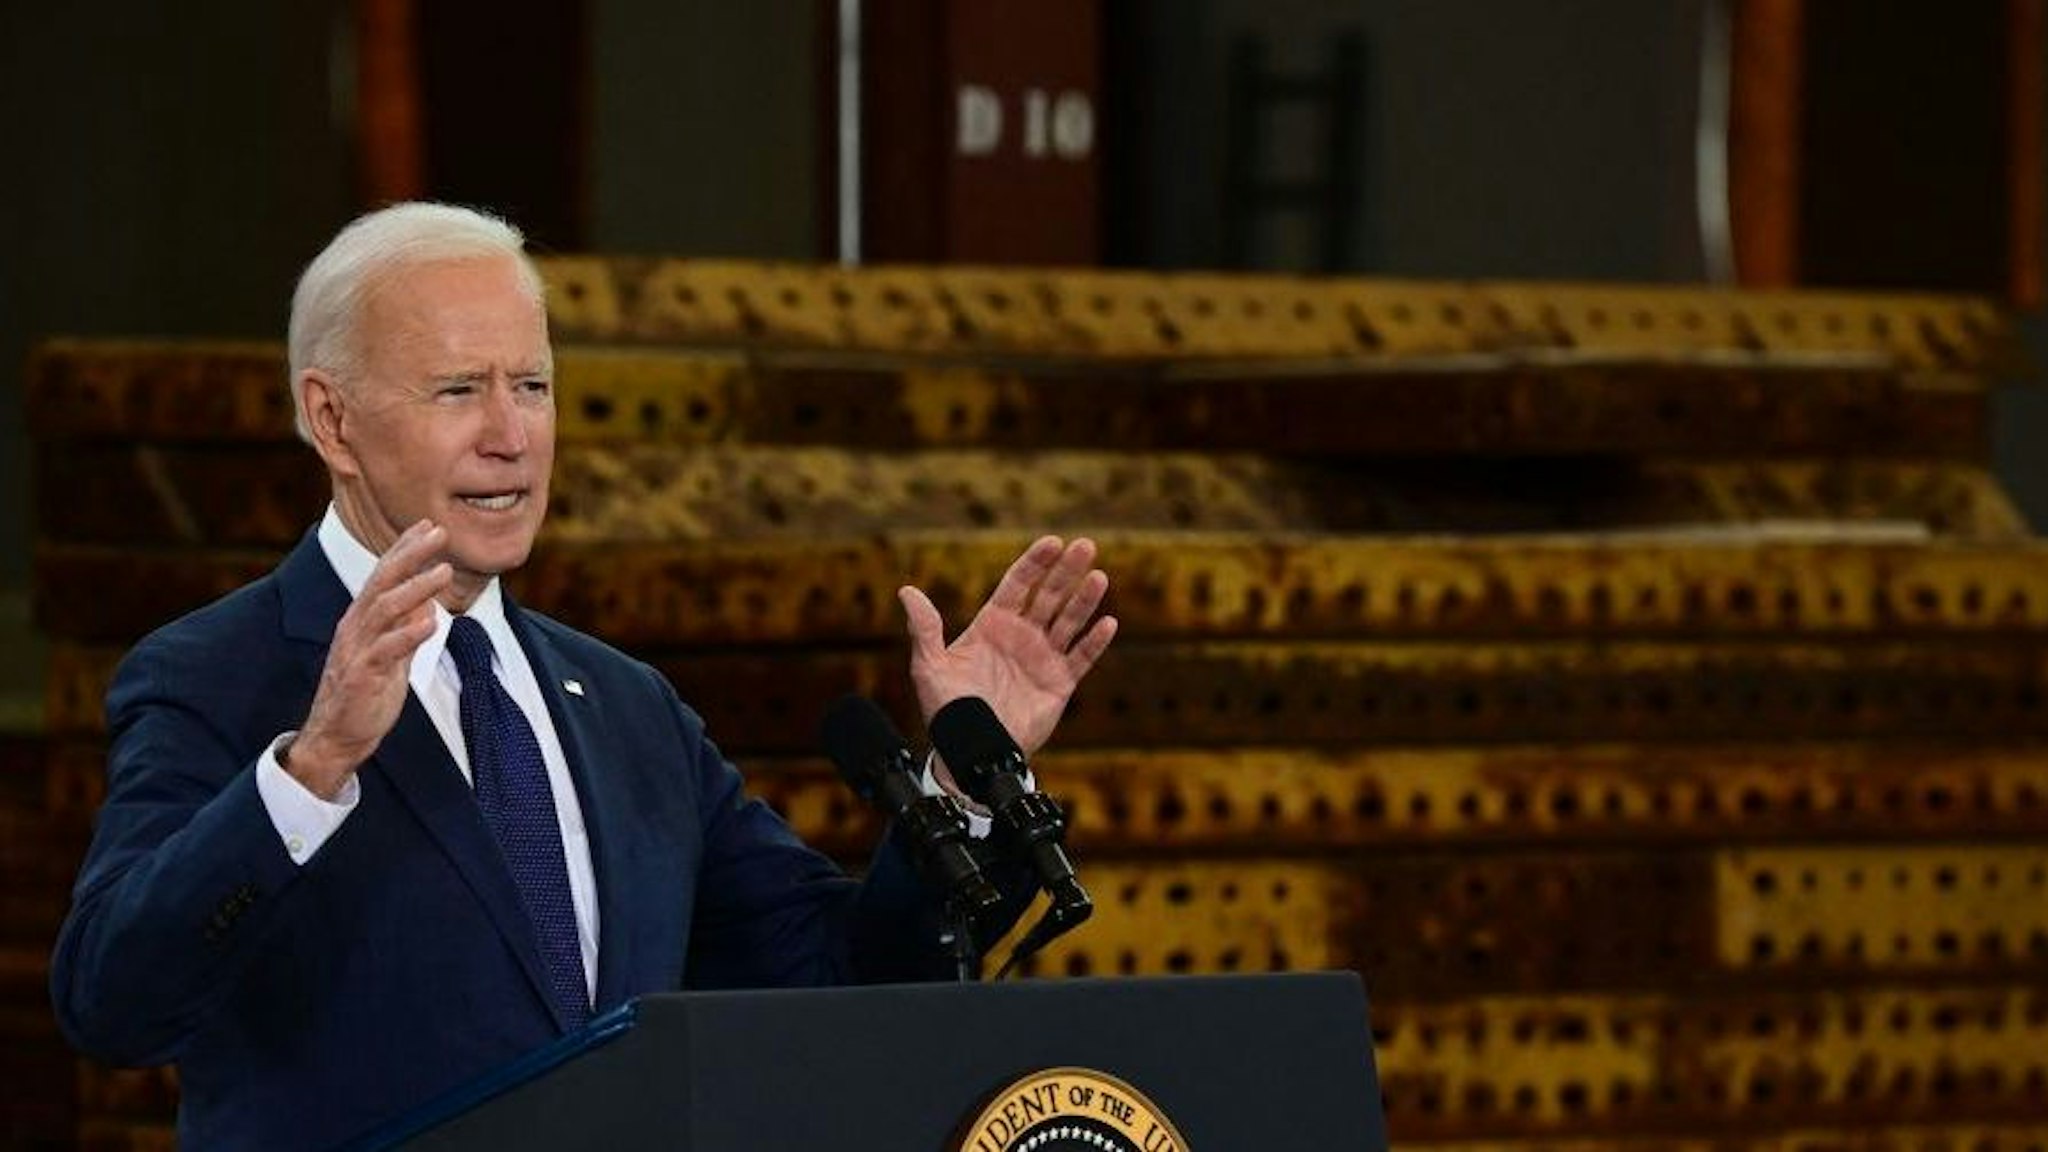 US President Joe Biden speaks in Pittsburgh, Pennsylvania, on March 31, 2021. - President Biden will unveil in Pittsburgh a $2 trillion infrastructure plan aimed at modernizing the United States' crumbling transport network, creating millions of jobs and enabling the country to "out-compete" China